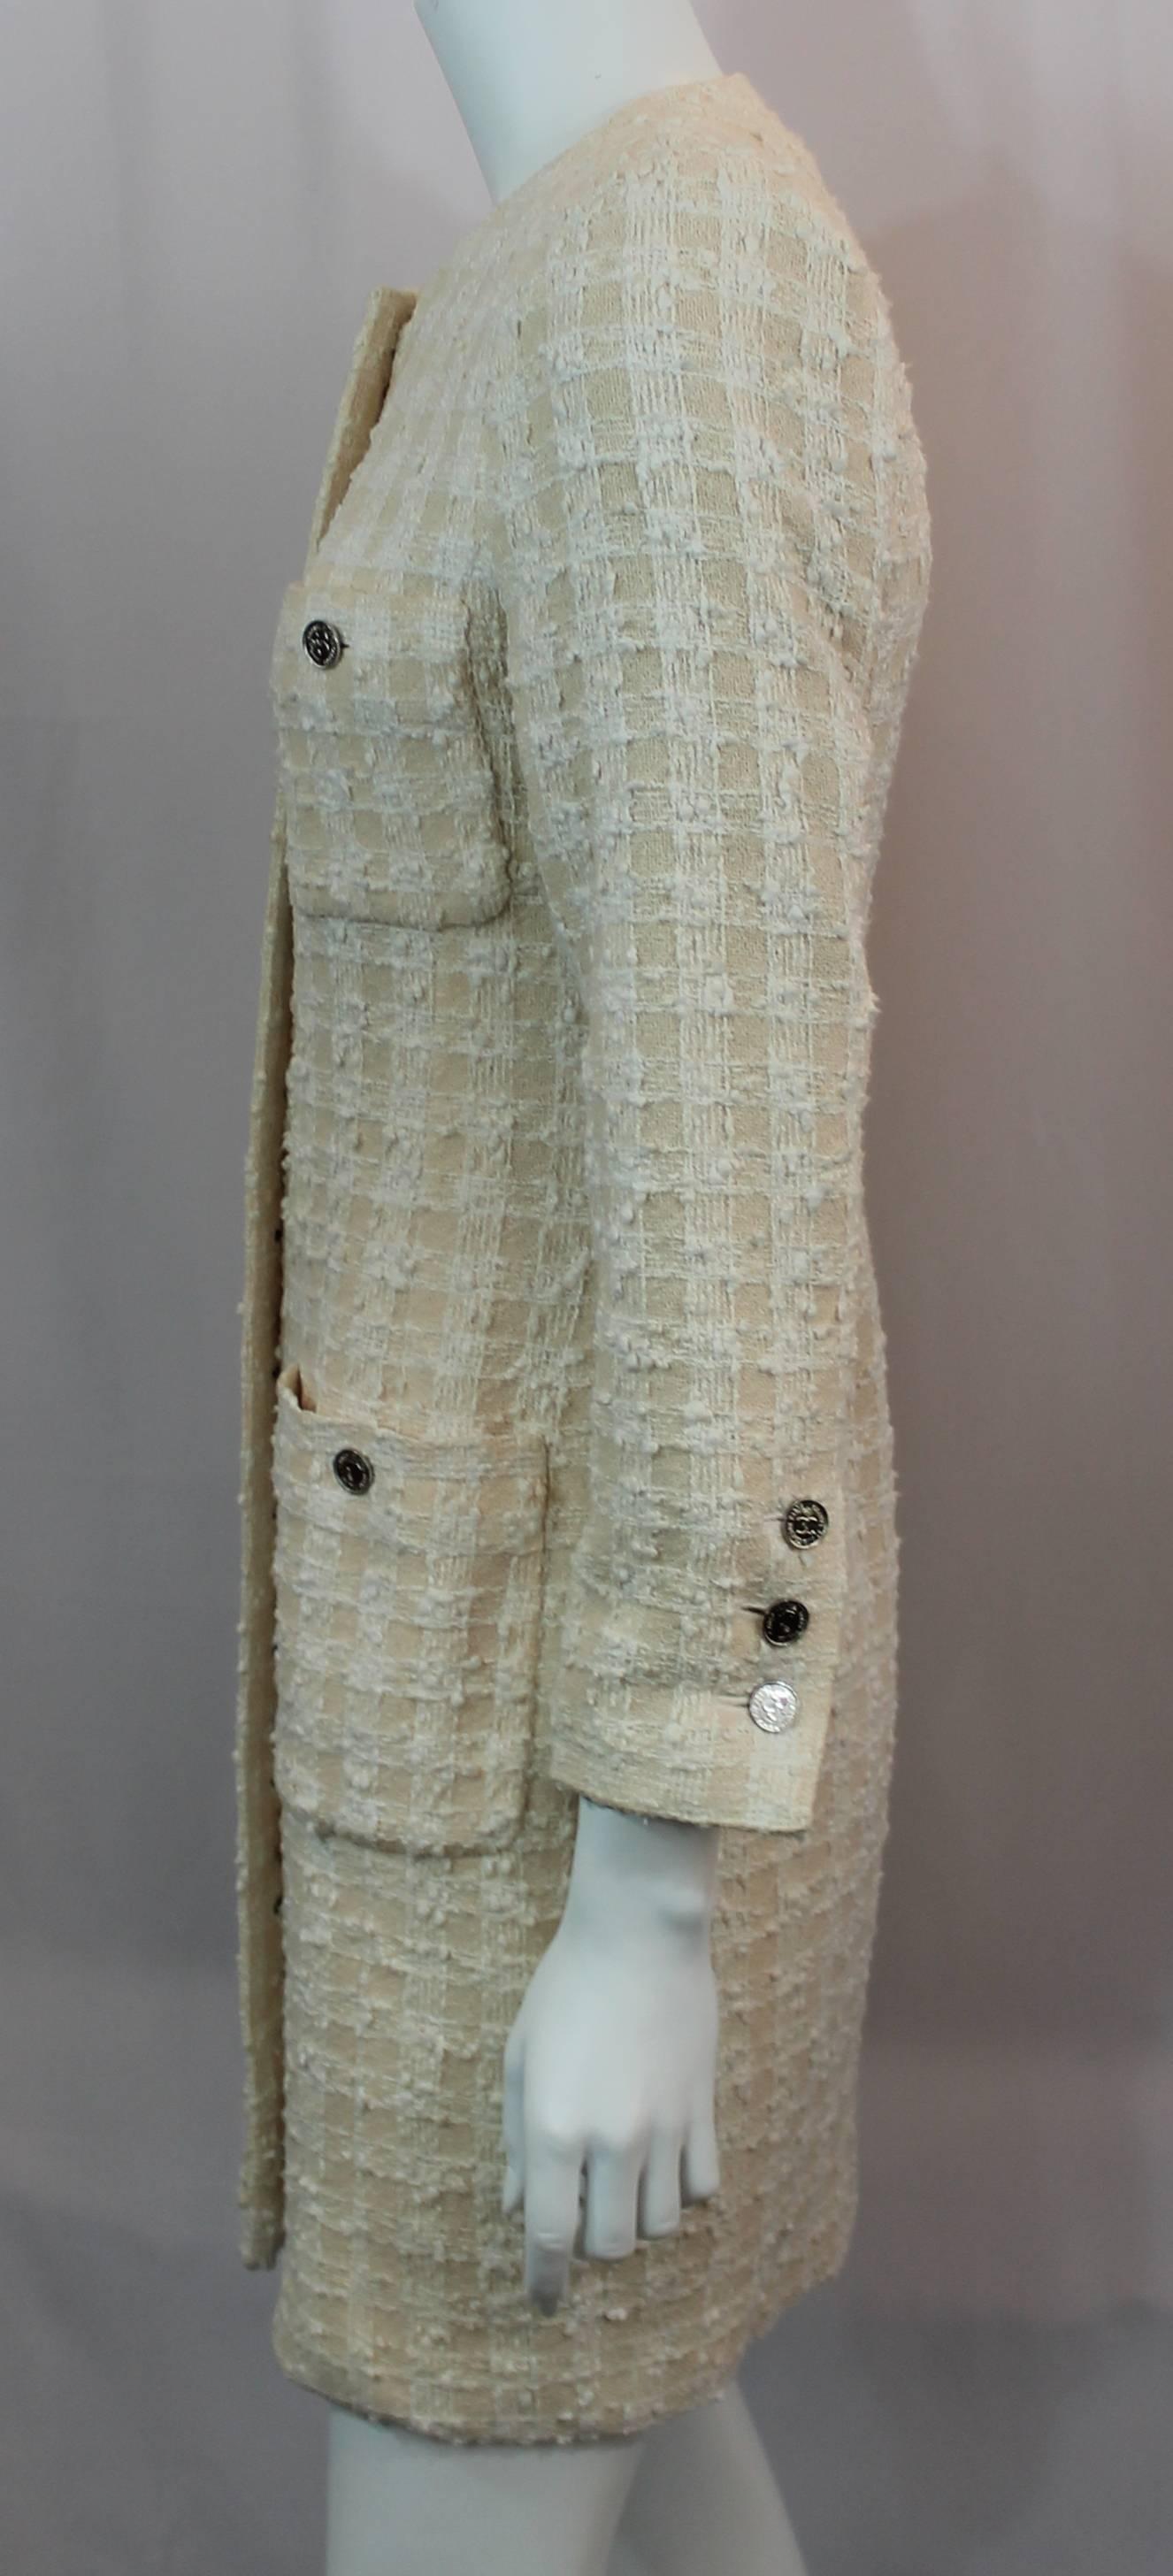 Gray Chanel Cream Cotton Blend Boucle 3/4 Coat with 4 Pockets - S - 1980's